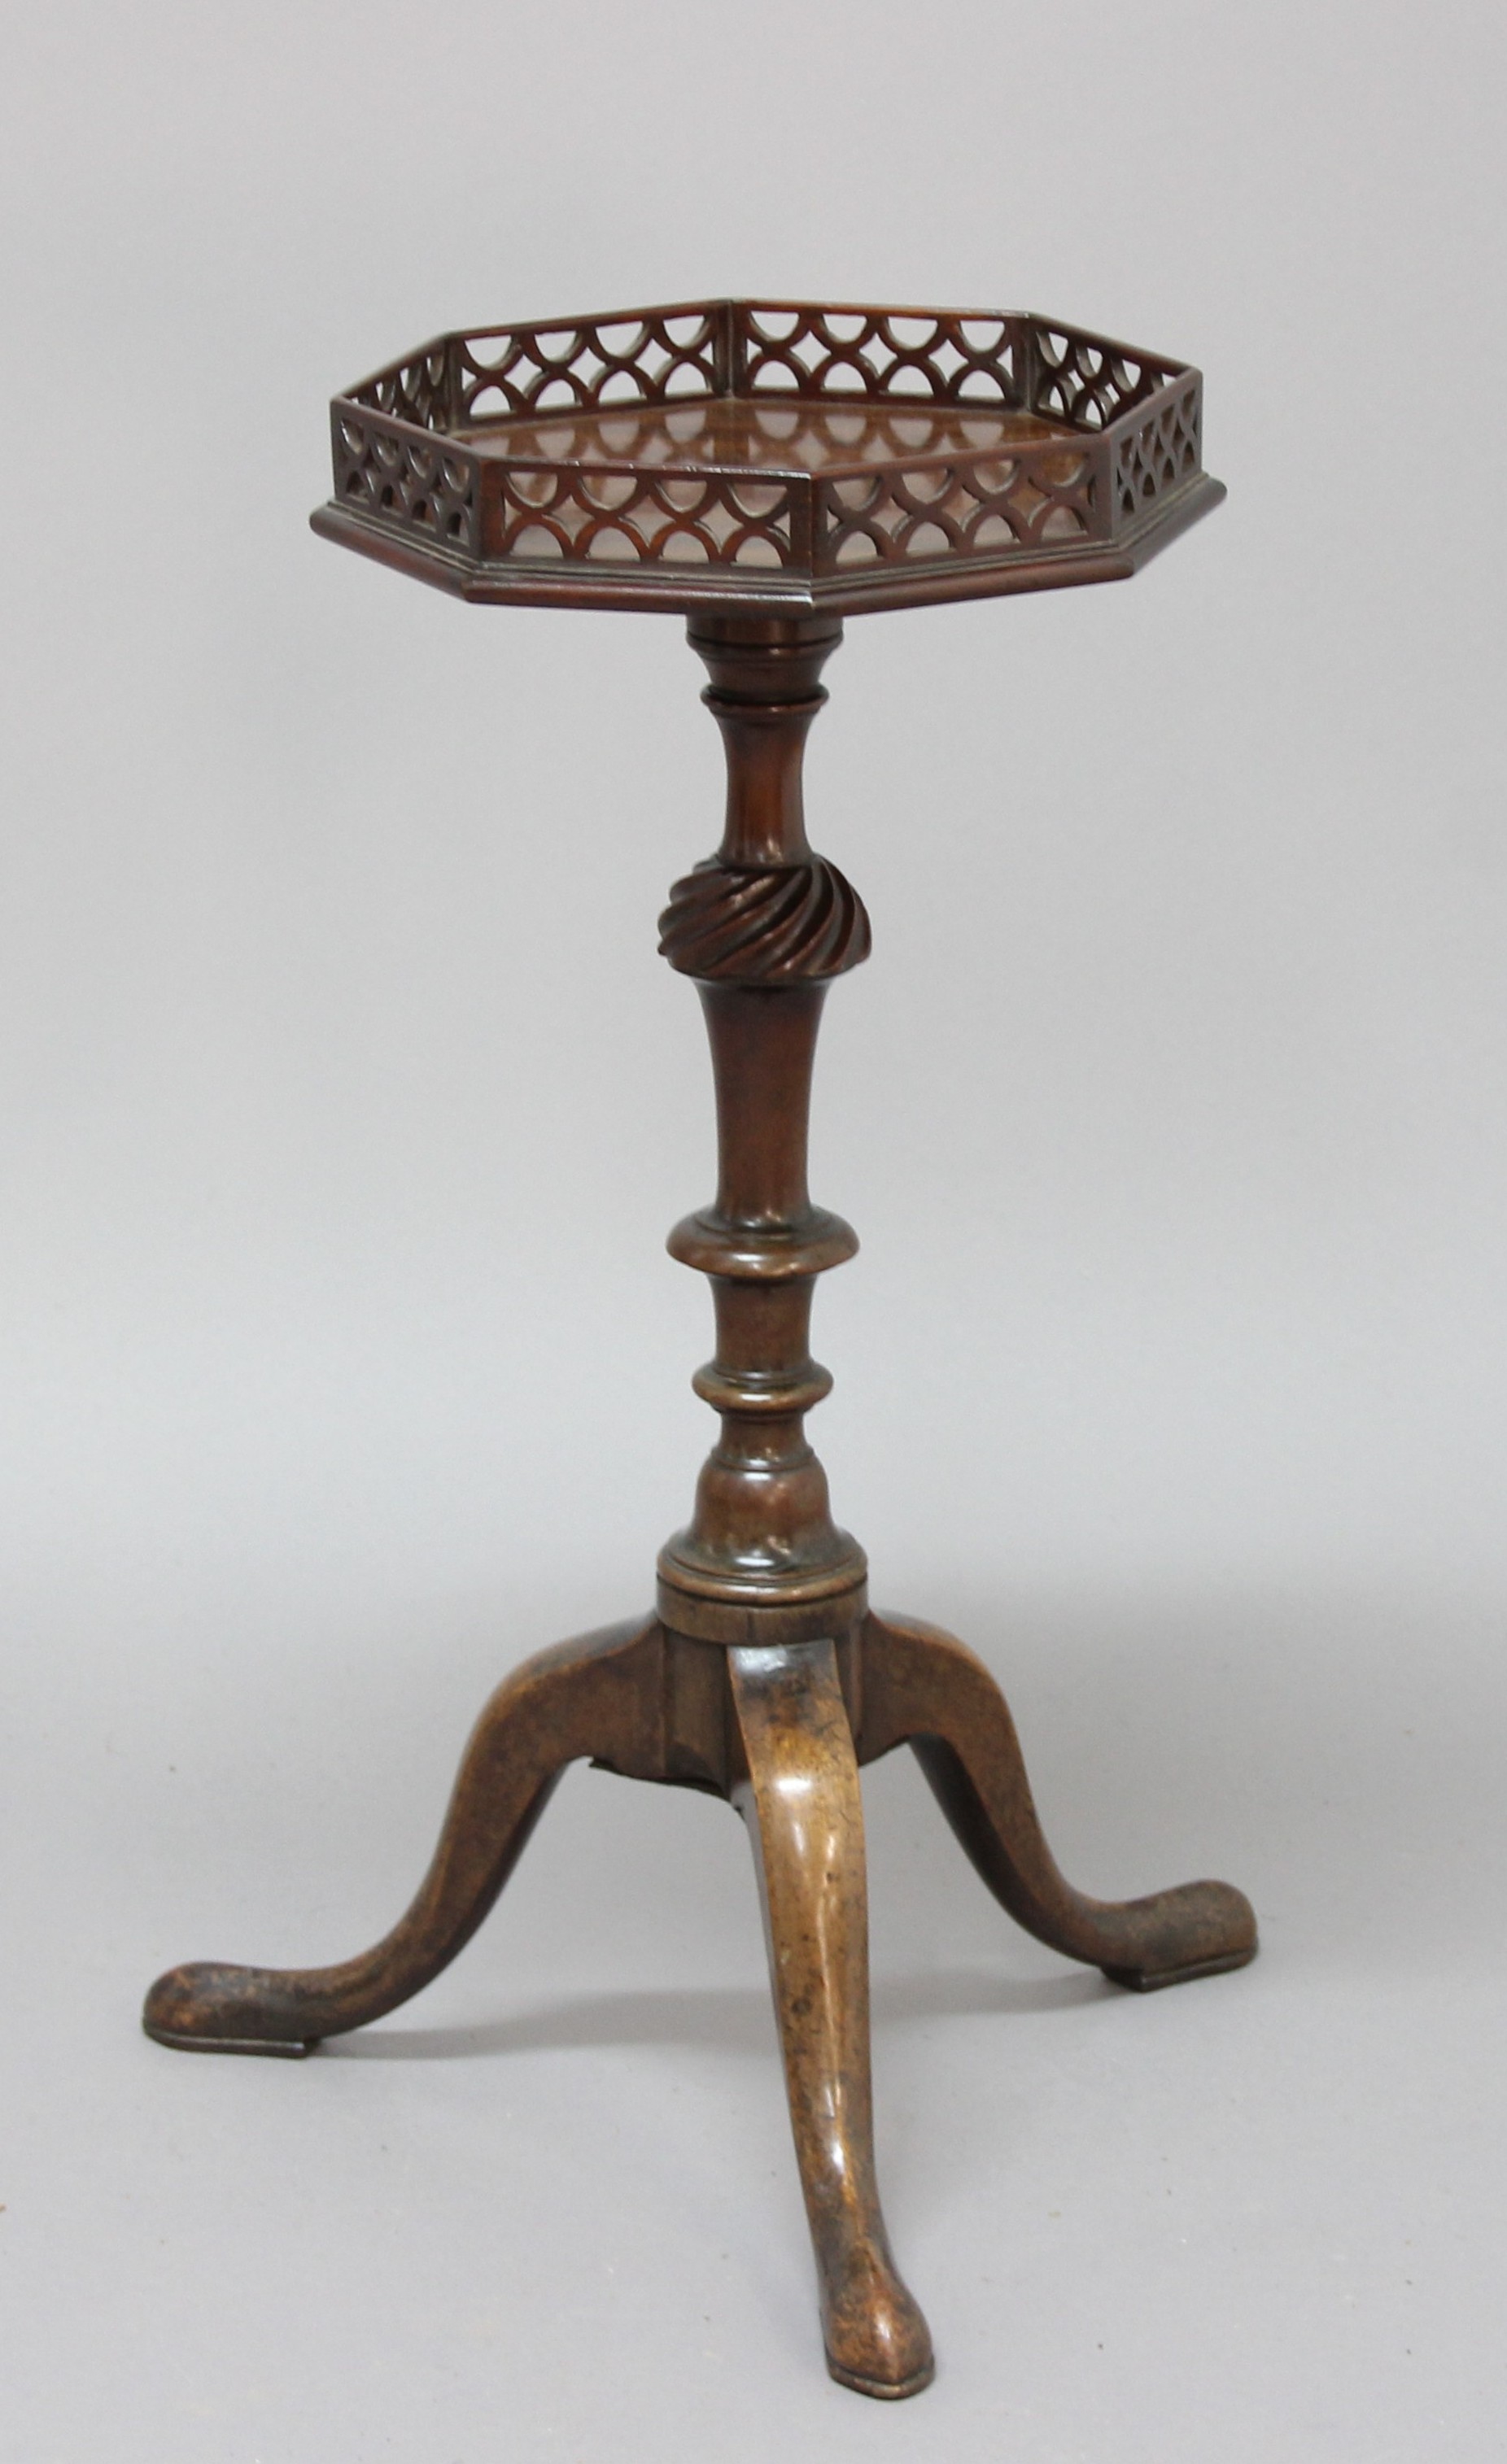 GEORGE III MAHOGANY WINE TABLE, the galleried, octagonal top on a turned and wrythen carved column